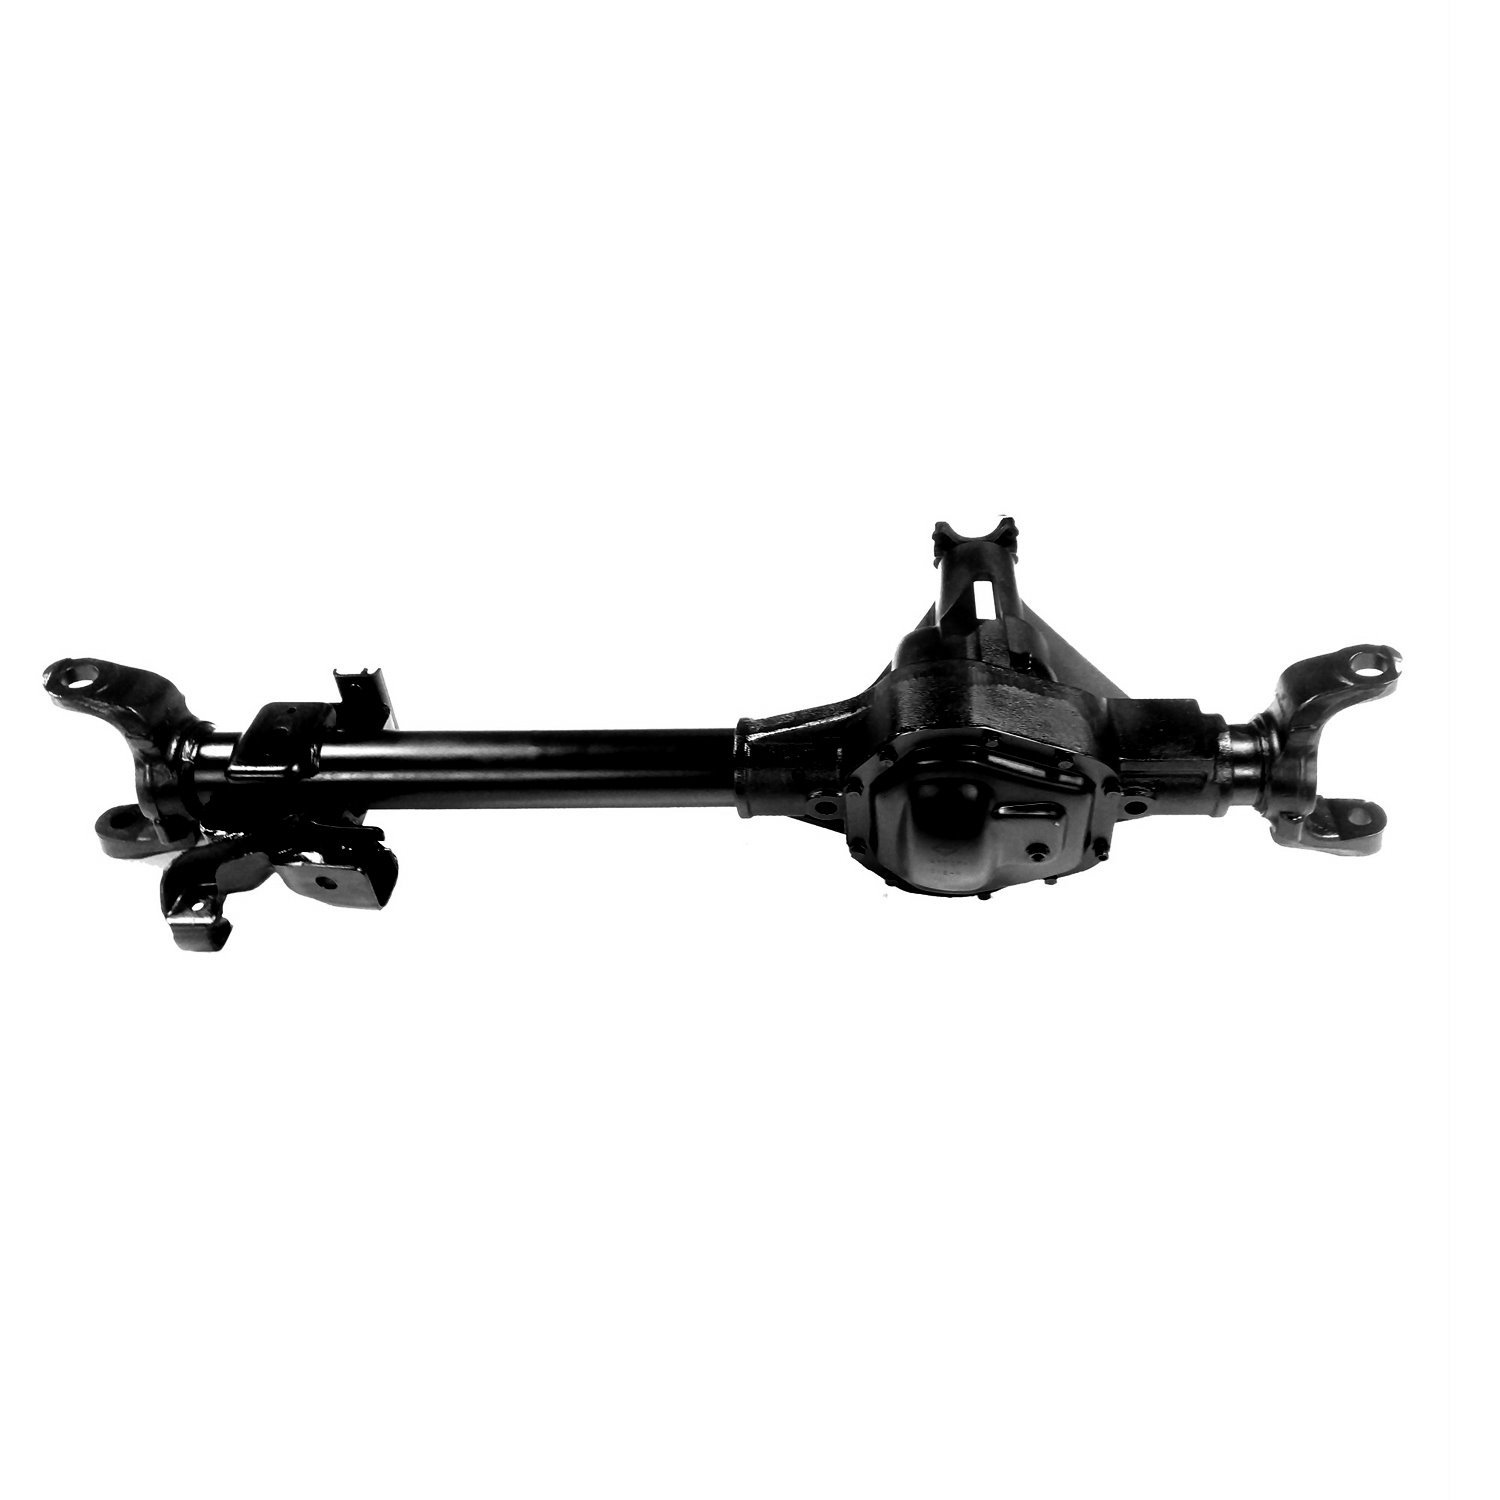 Remanufactured Complete Axle Assembly for Dana 60 05-07 Ford F250 & F350 4.11 Ratio